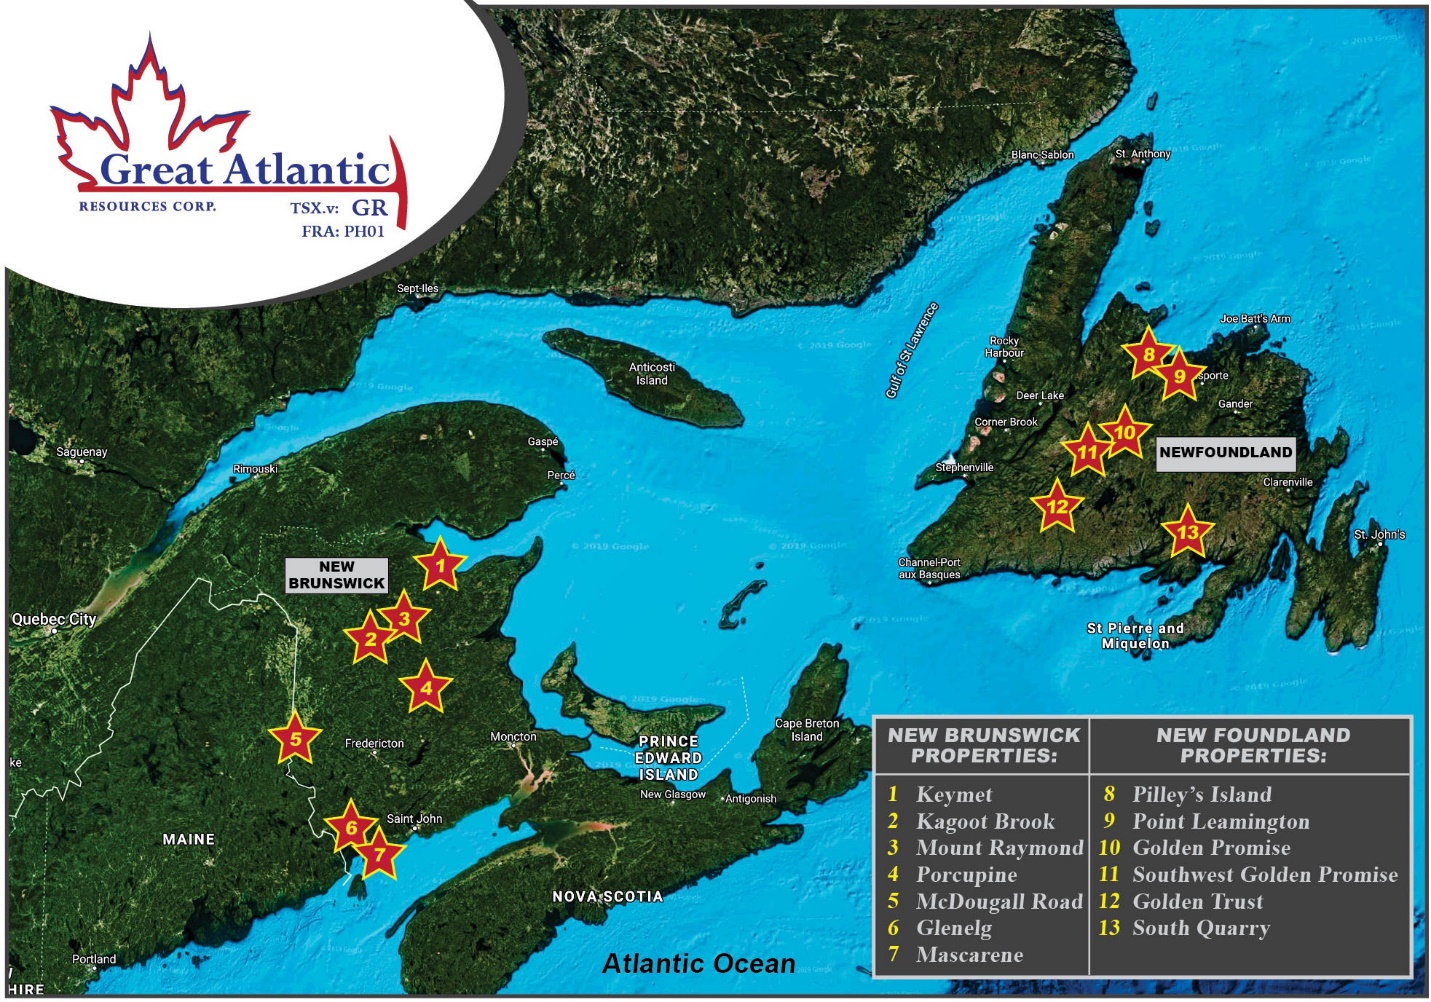 Great Atlantic Resources Corp., Wednesday, May 20, 2020, Press release picture